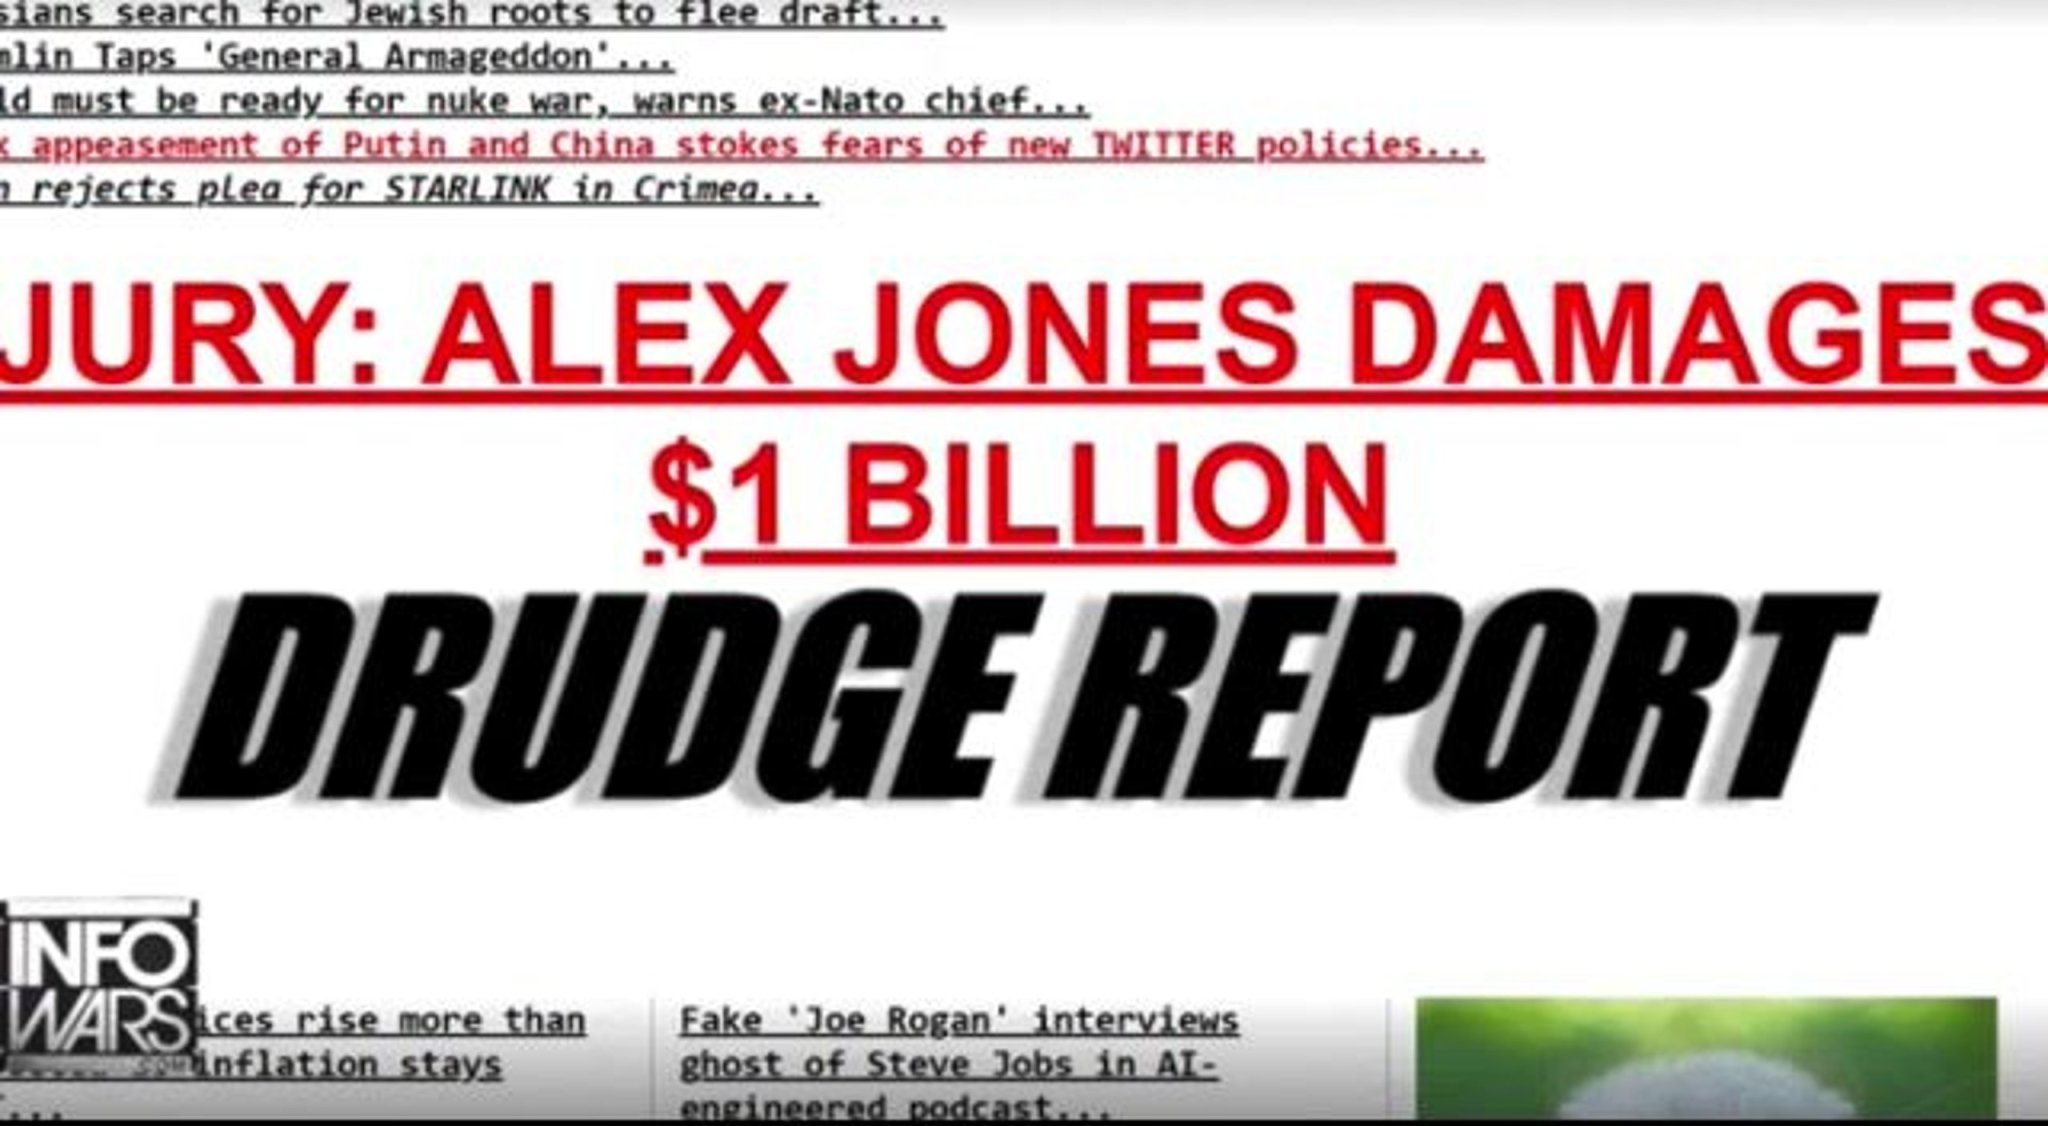 Alex Jones responds to owing ~$1B in damages to Sandy Hook families by asking for donations to fund InfoWars.